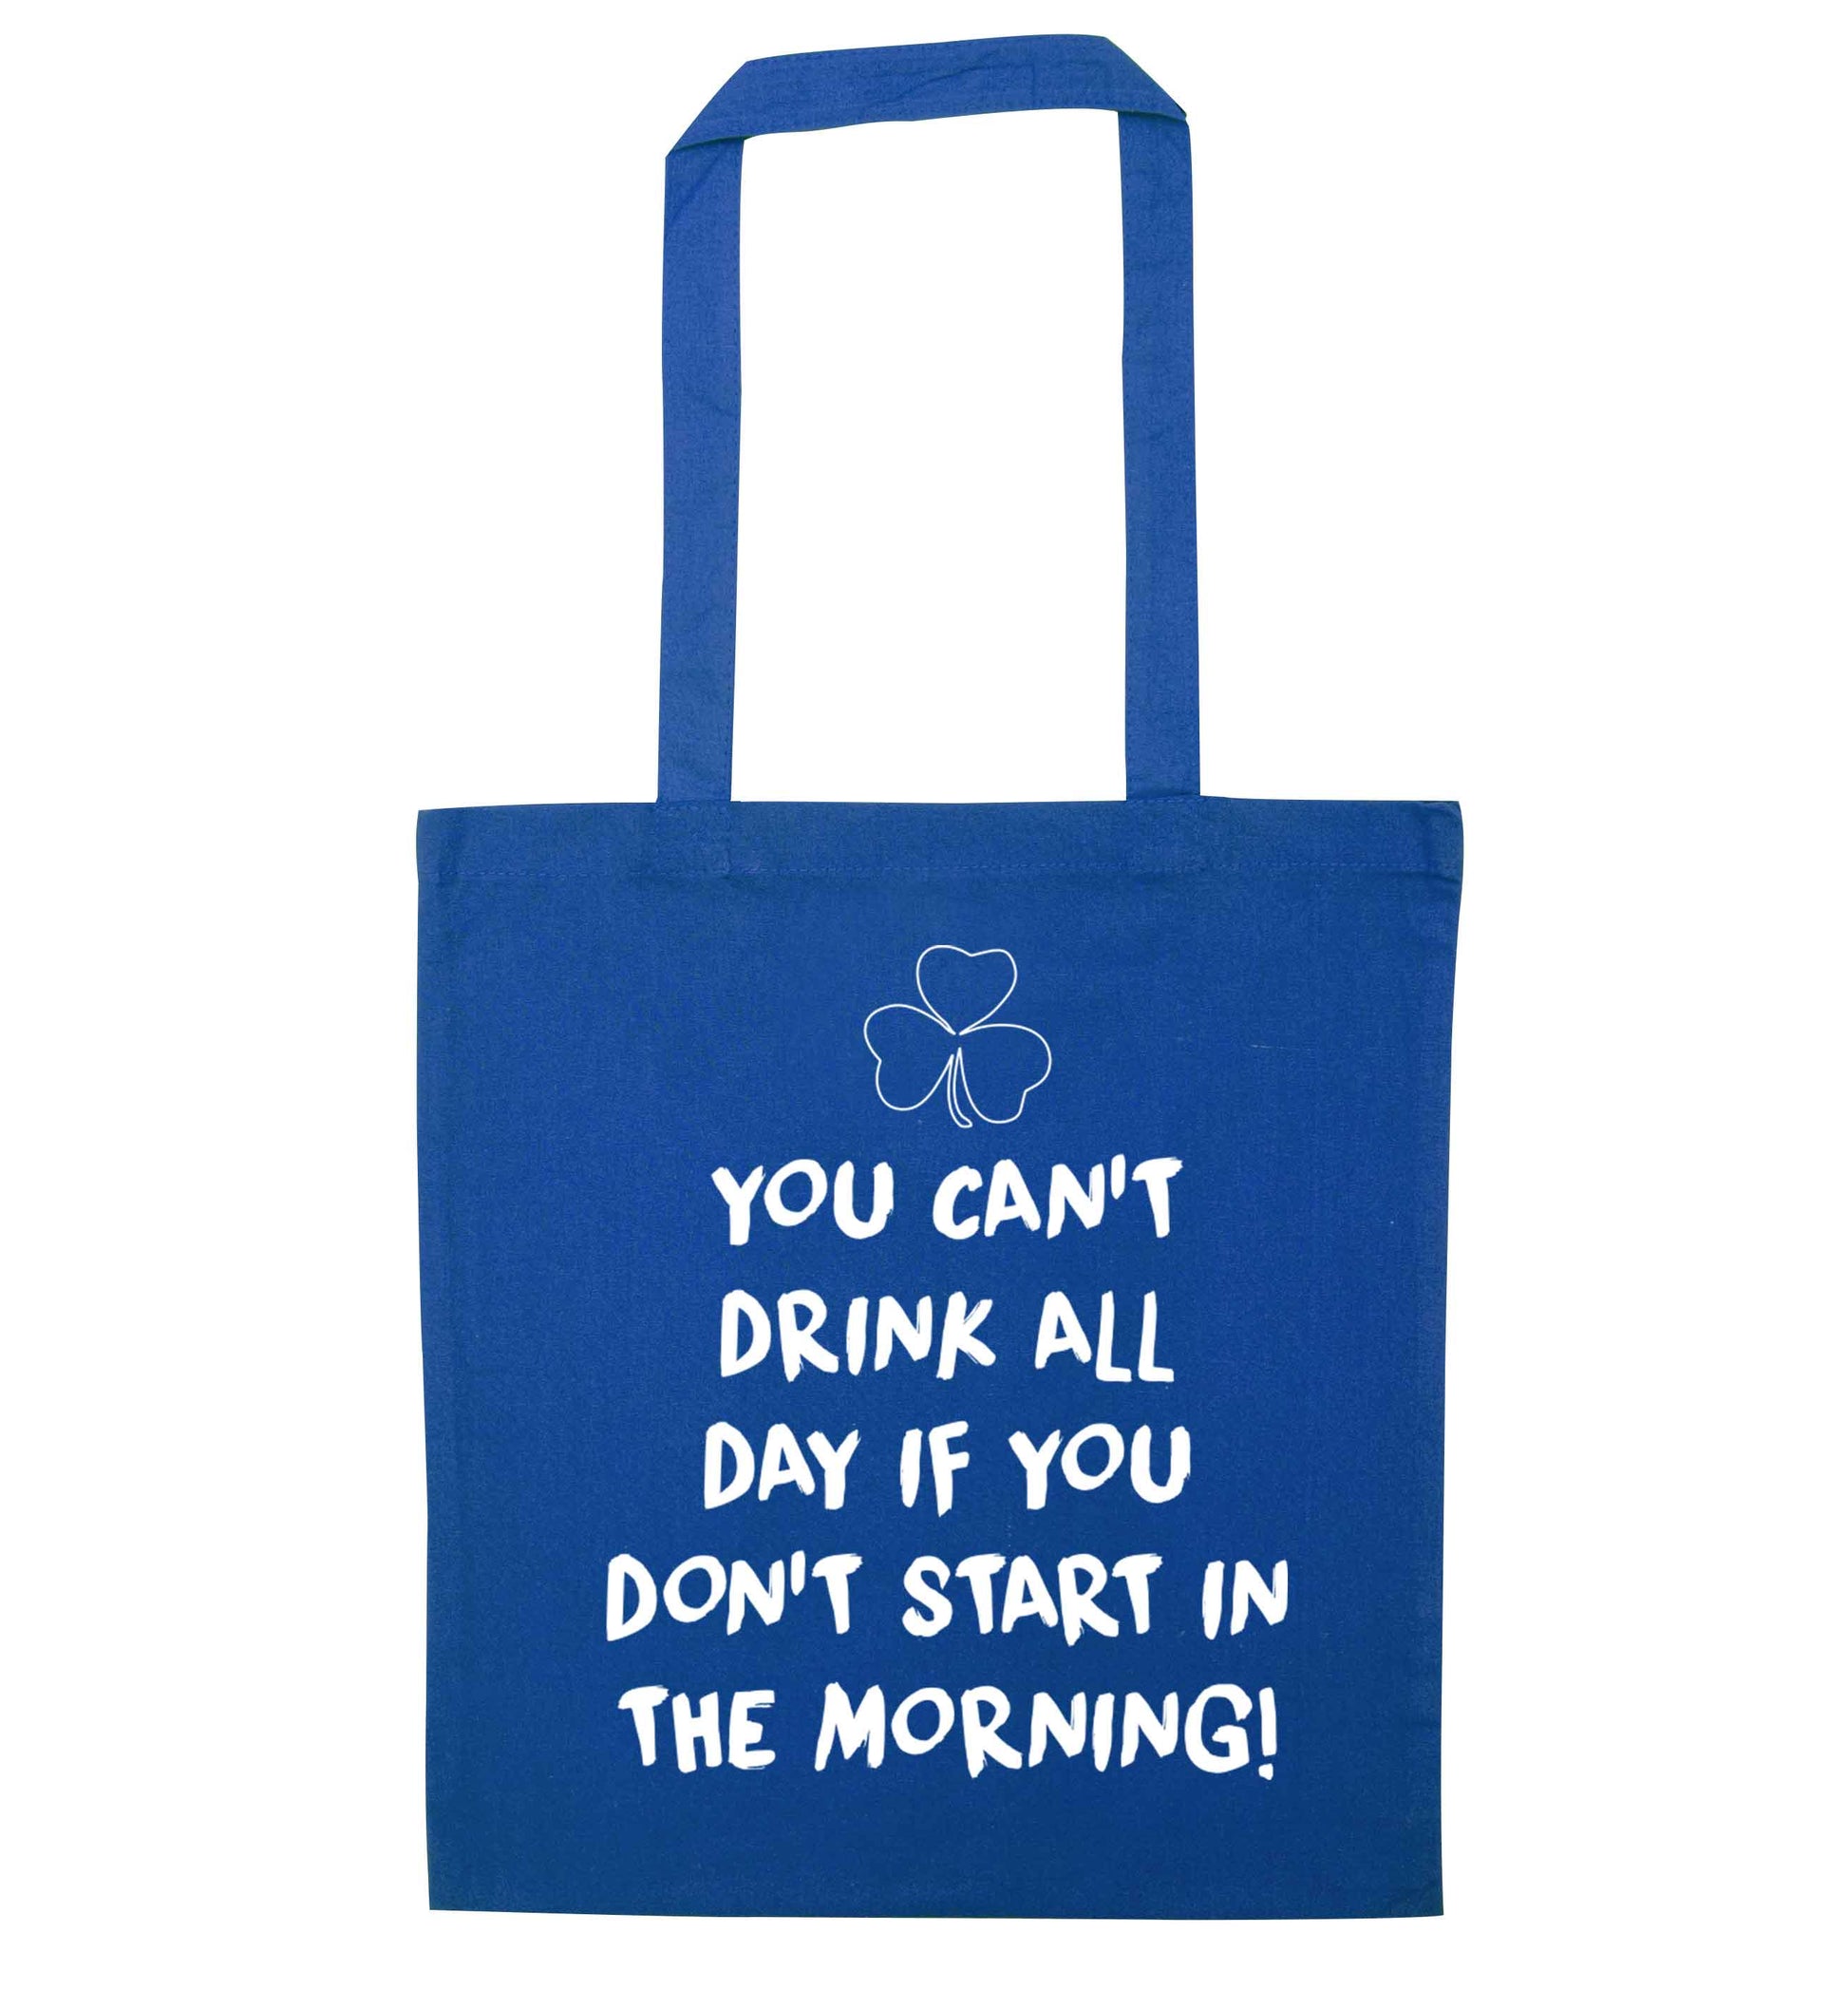 You can't drink all day if you don't start in the morning blue tote bag